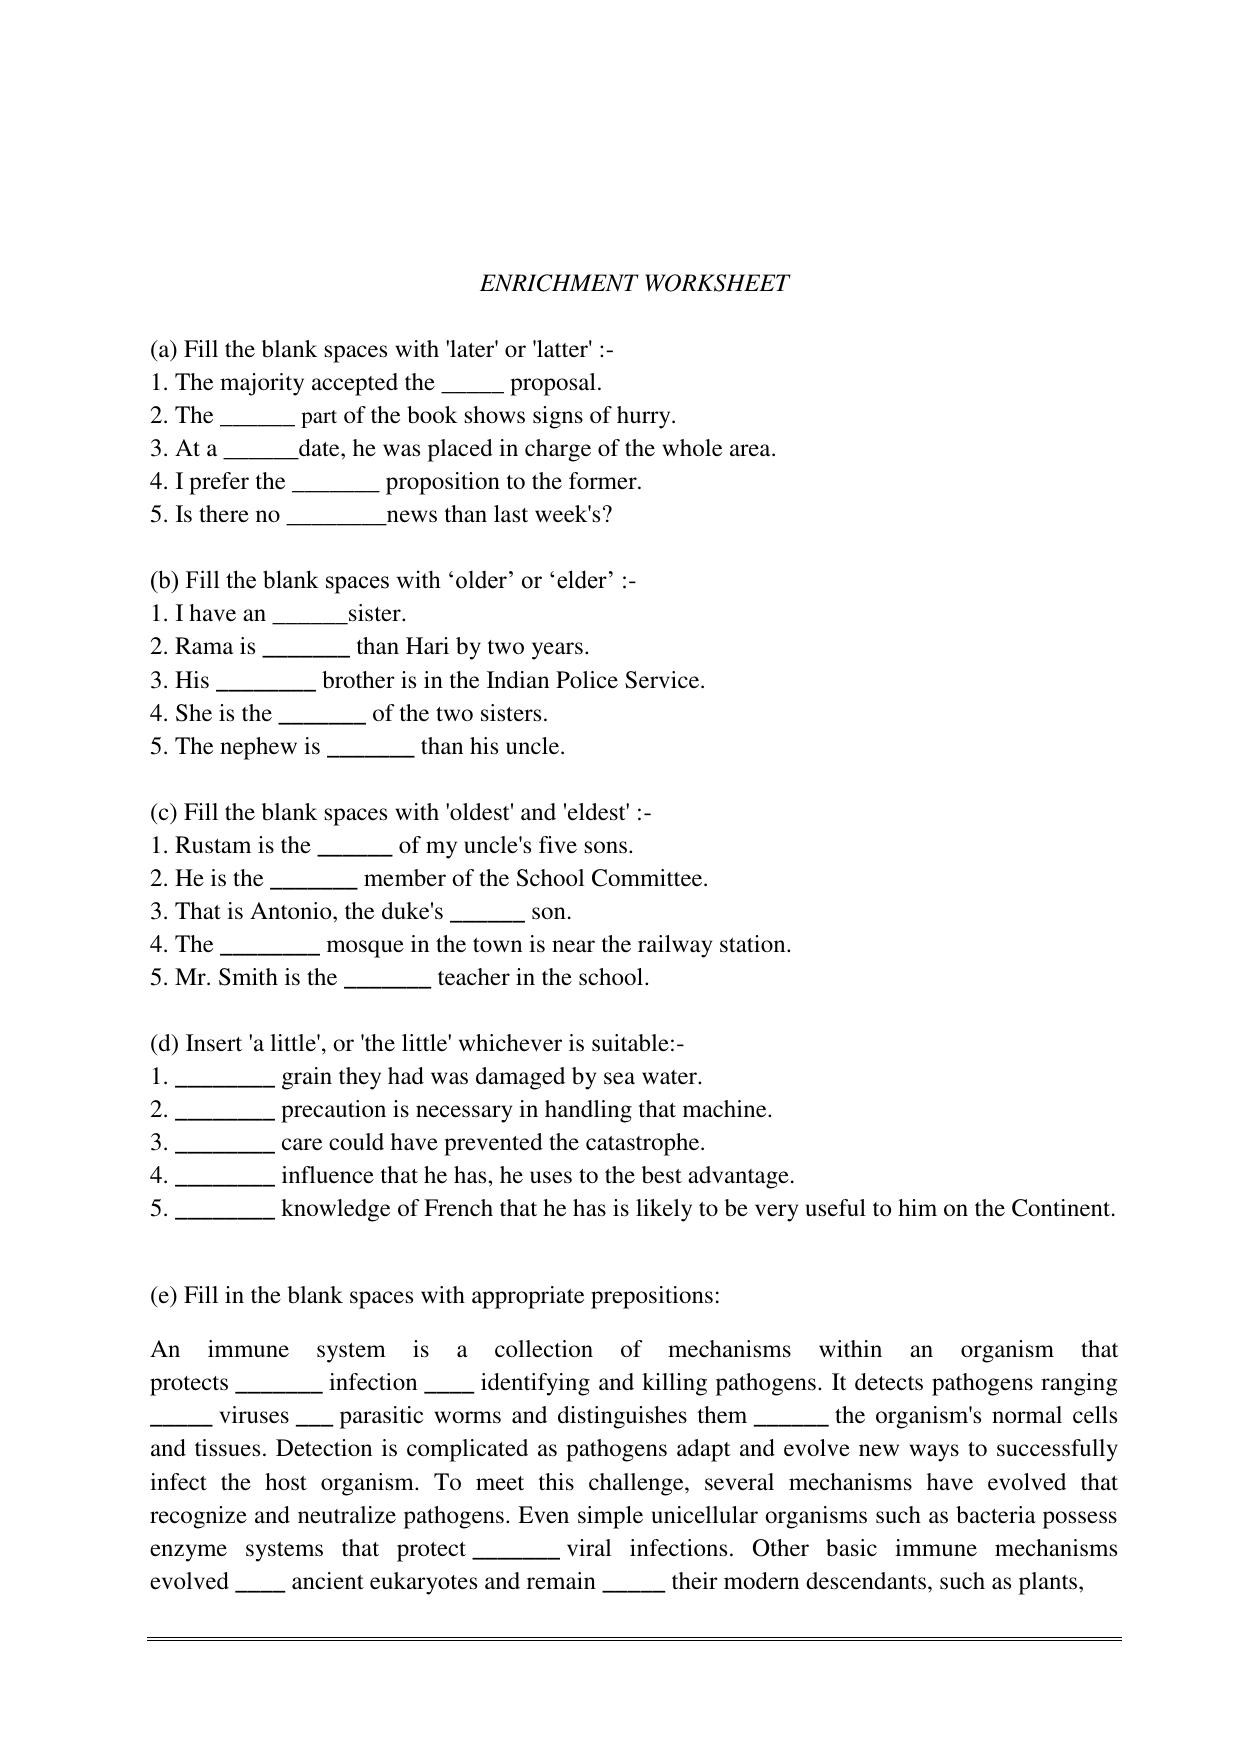 CBSE Worksheets for Class 11 English Practice Worksheet Assignment - Page 1